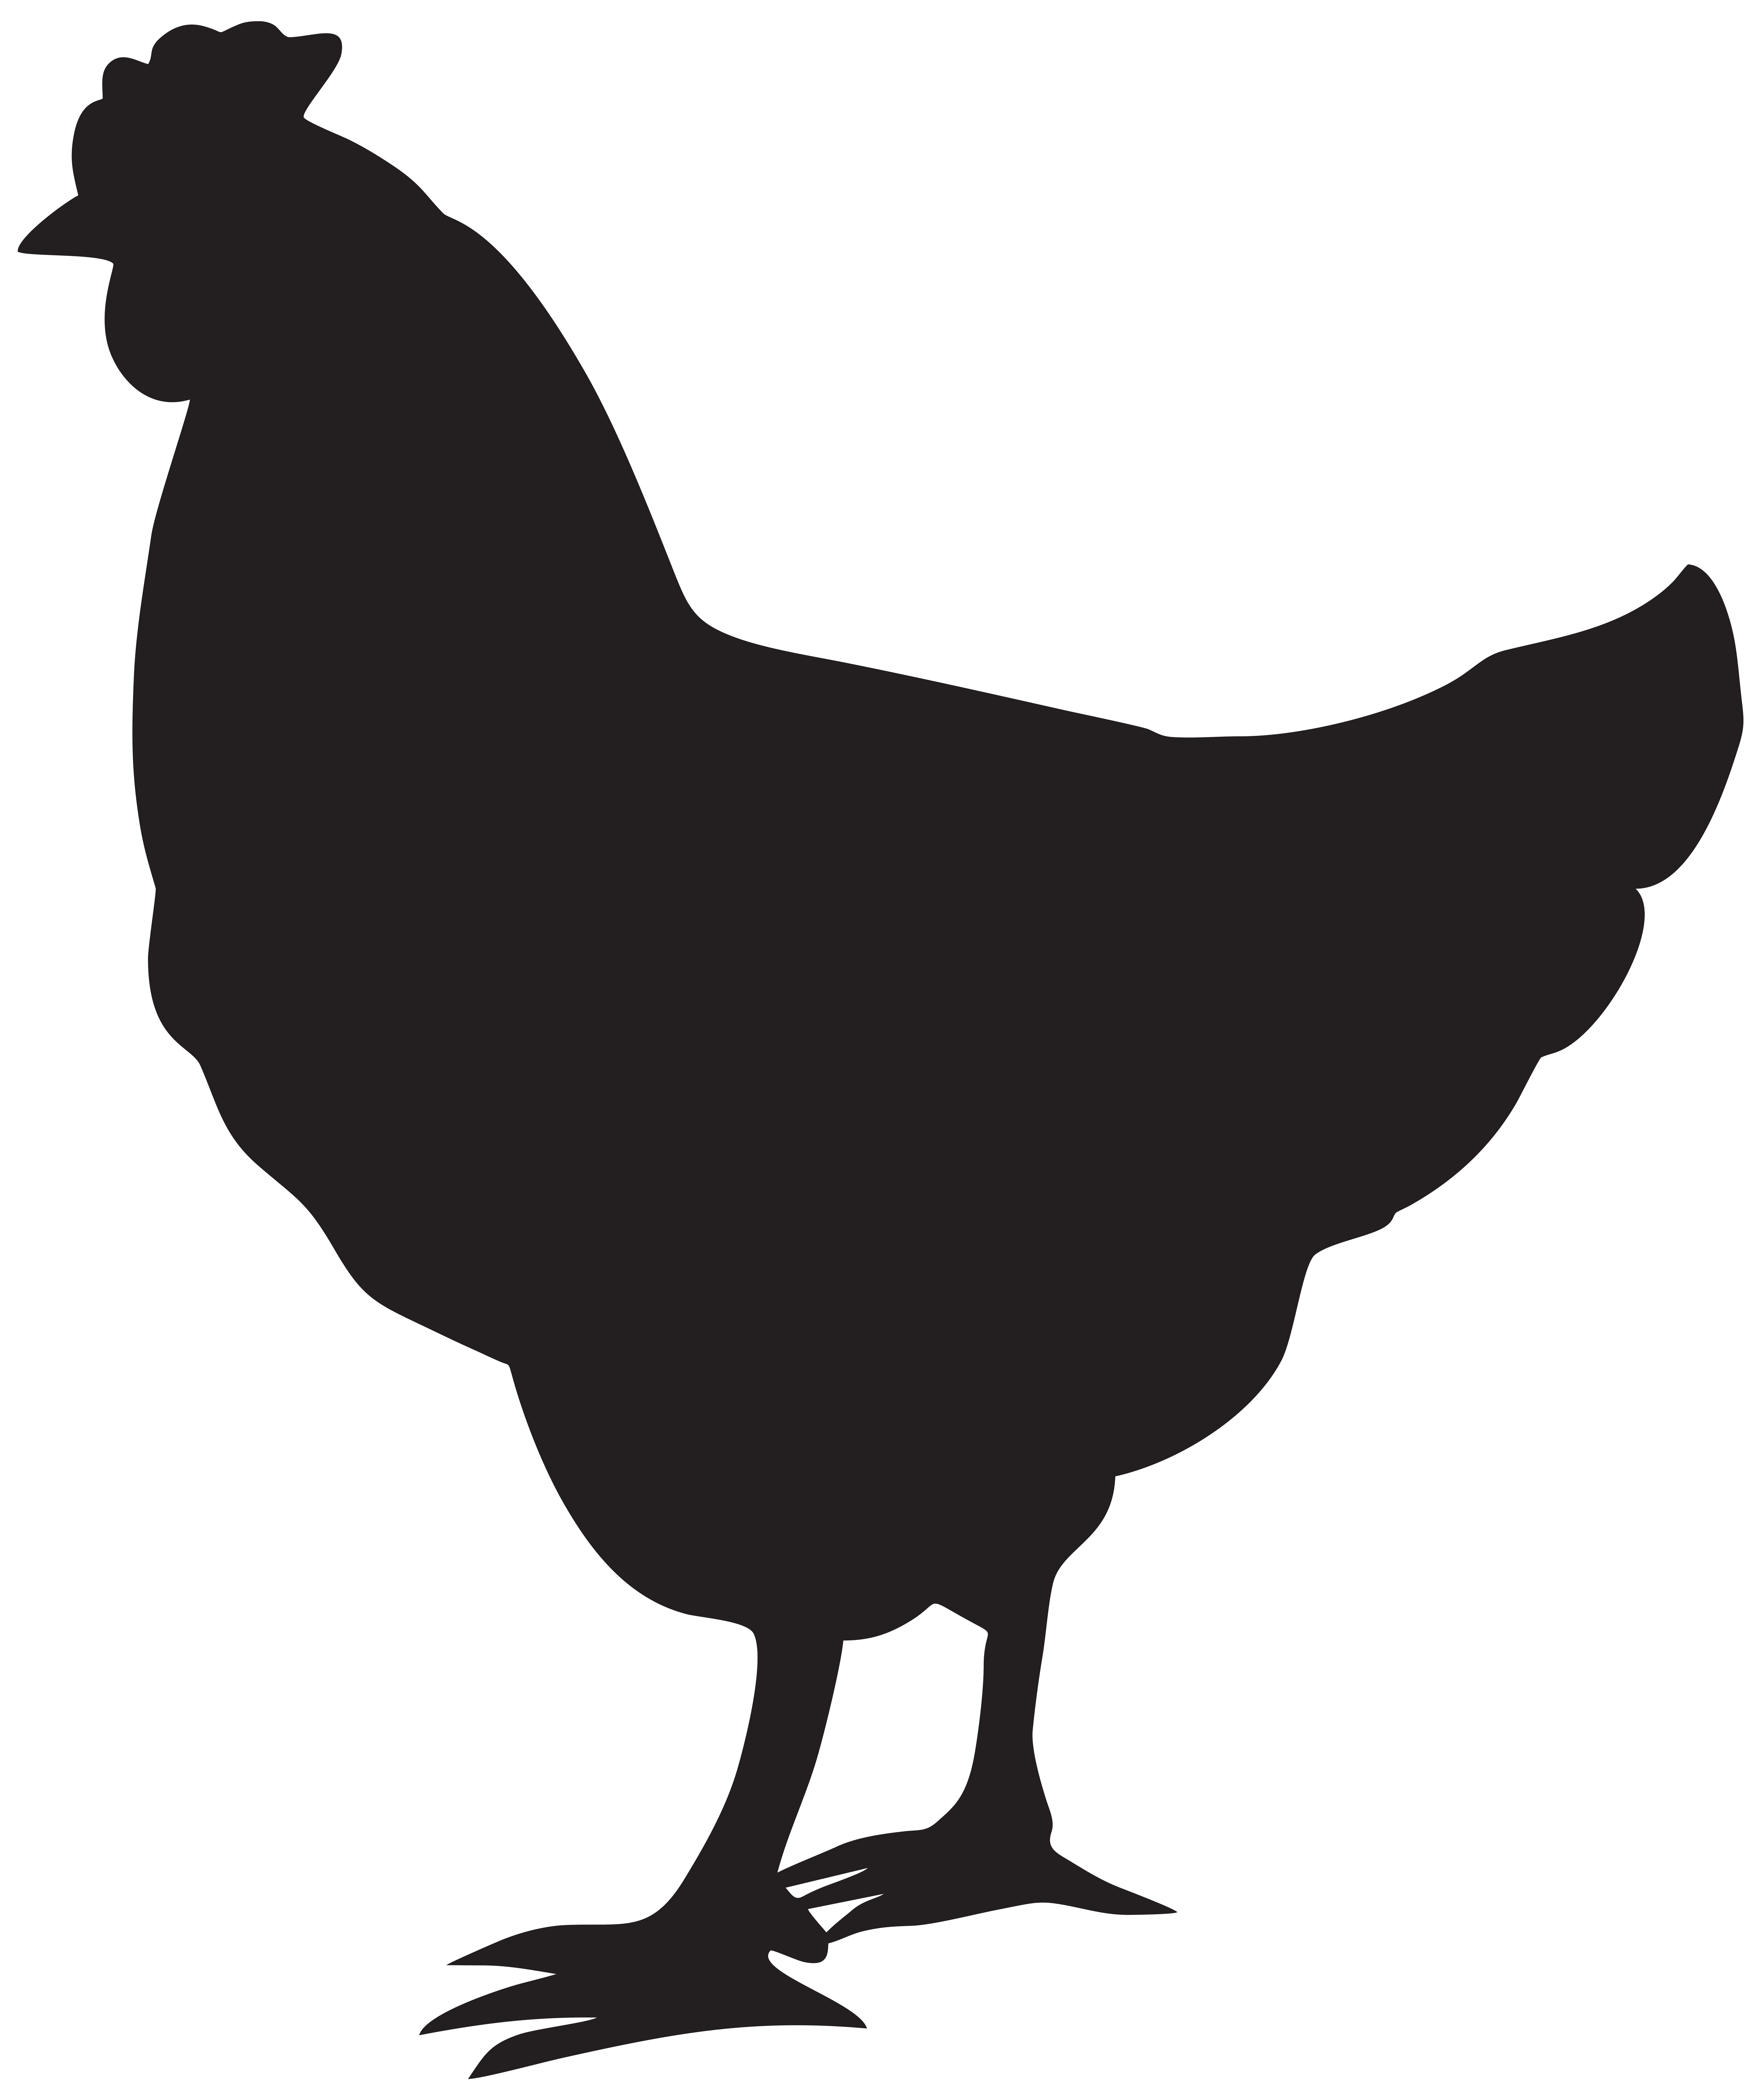 Chicken silhouette rooster.